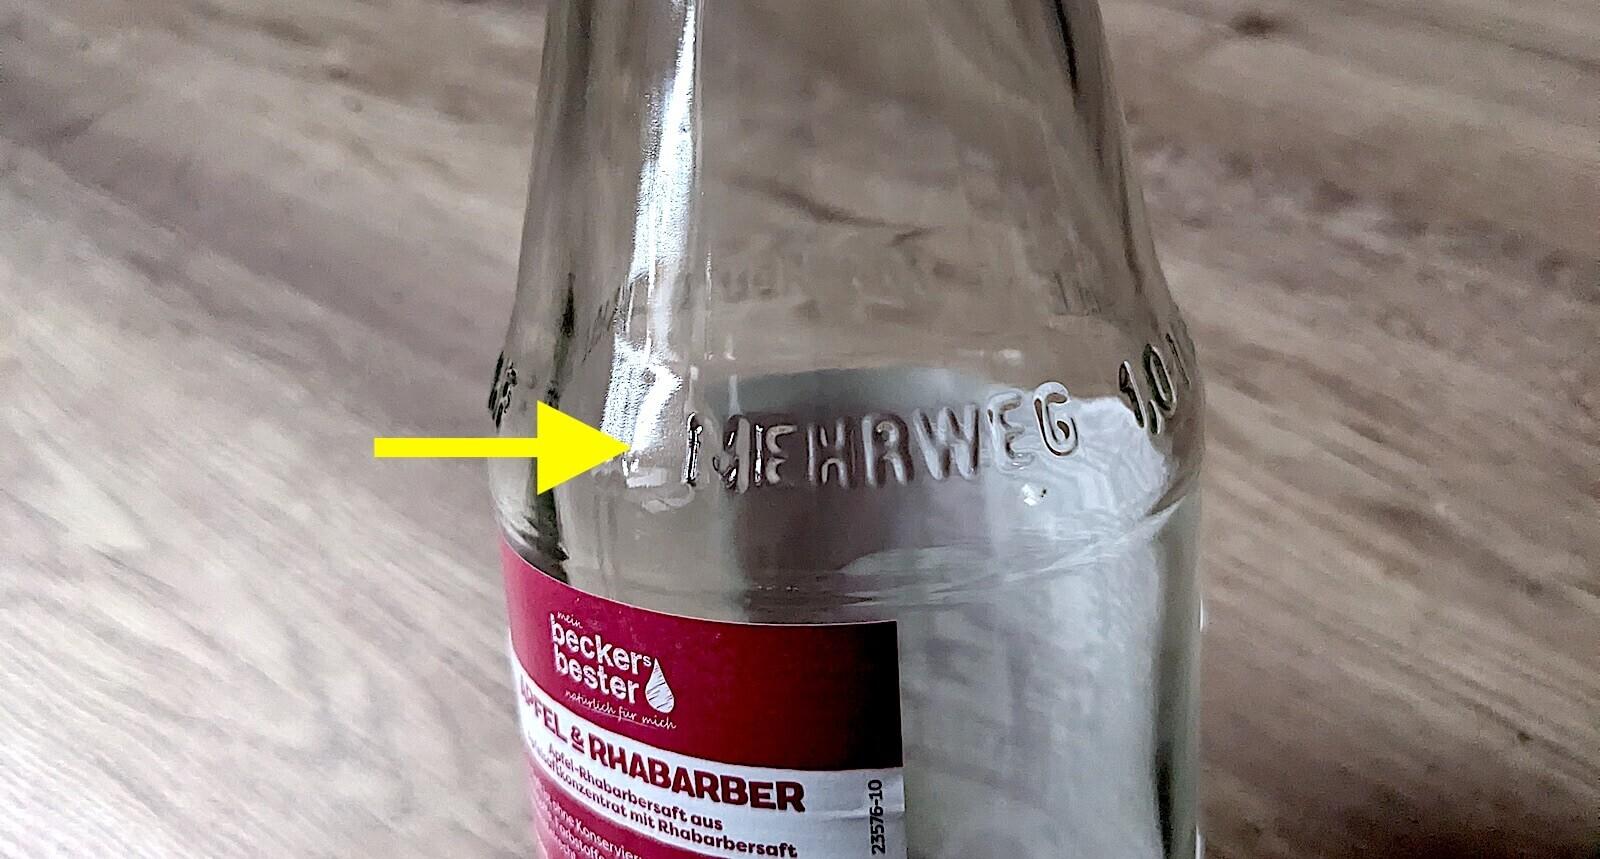 A glass bottle with an embossed "Mehrweg"